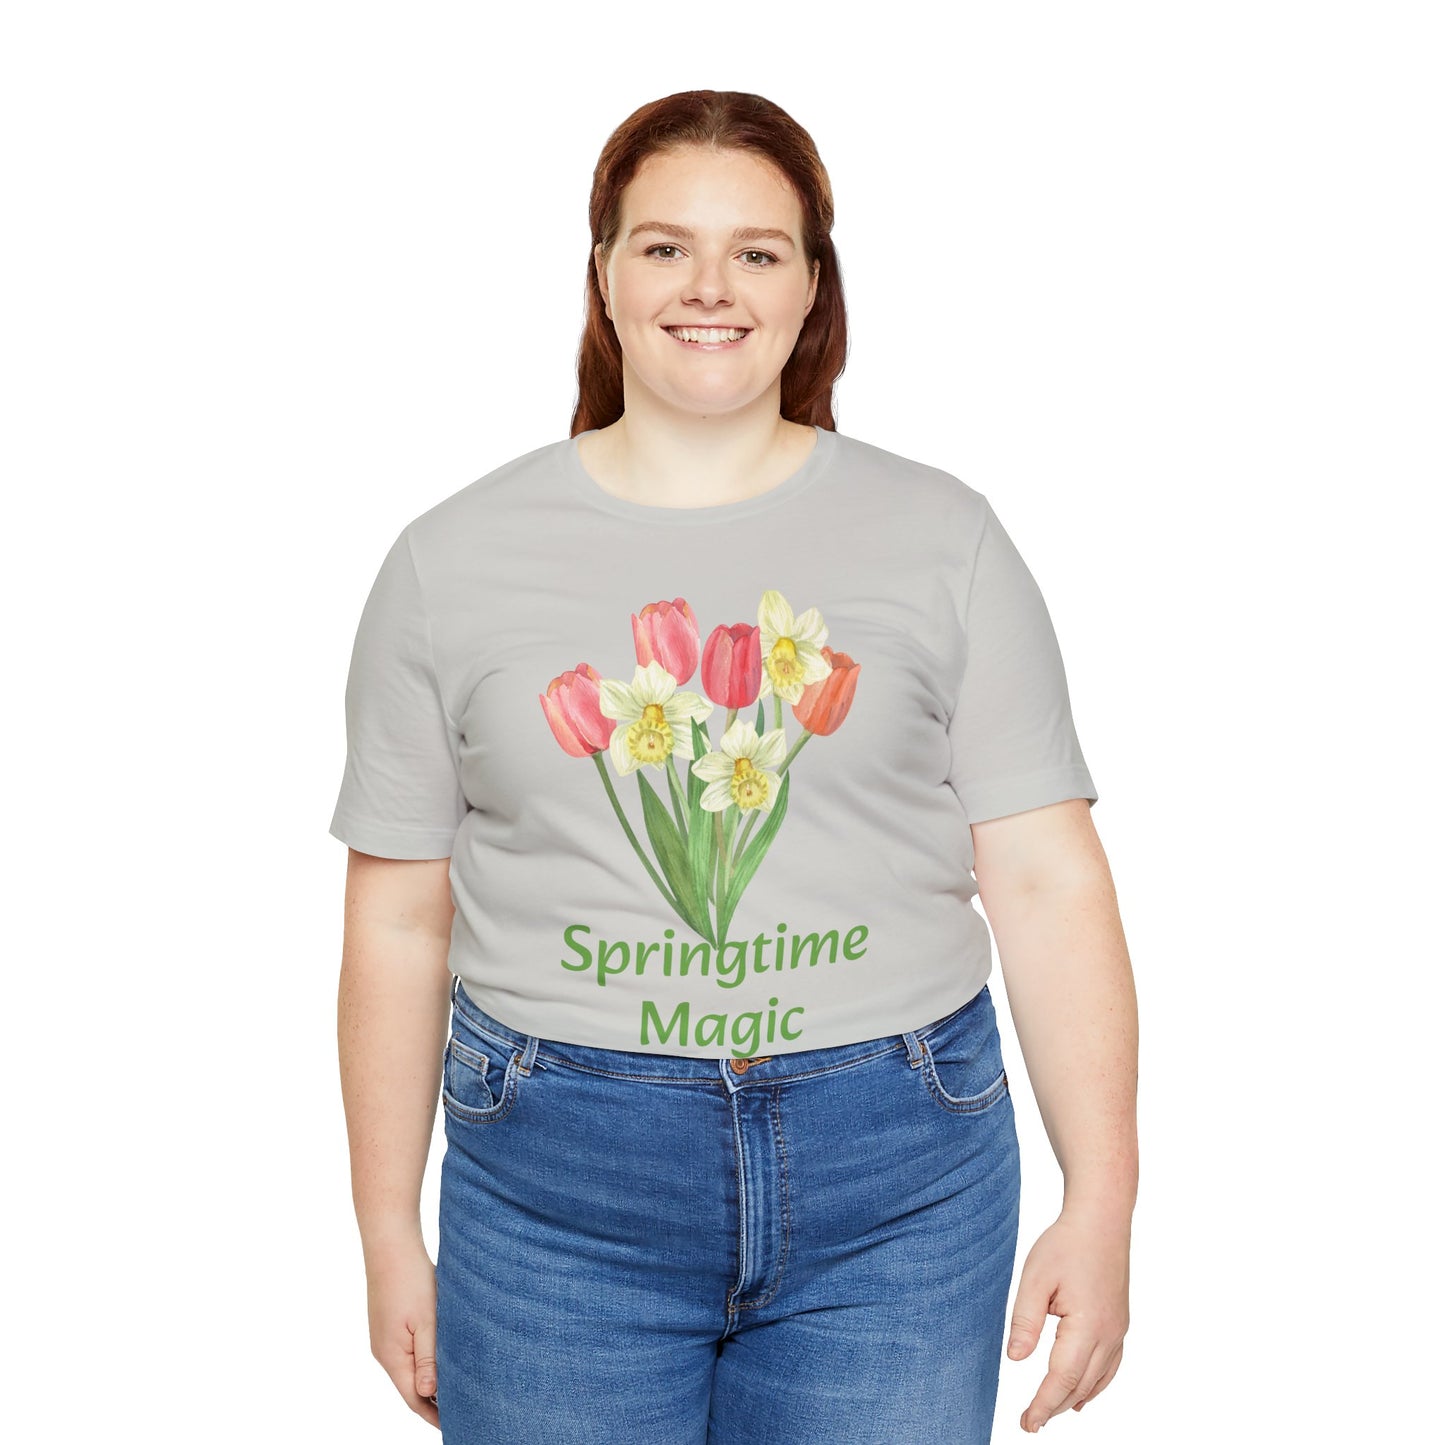 Woman wearing a gray Unisex Springtime-Magic T-shirt from Printify with a tulip design and the text "springtime magic".